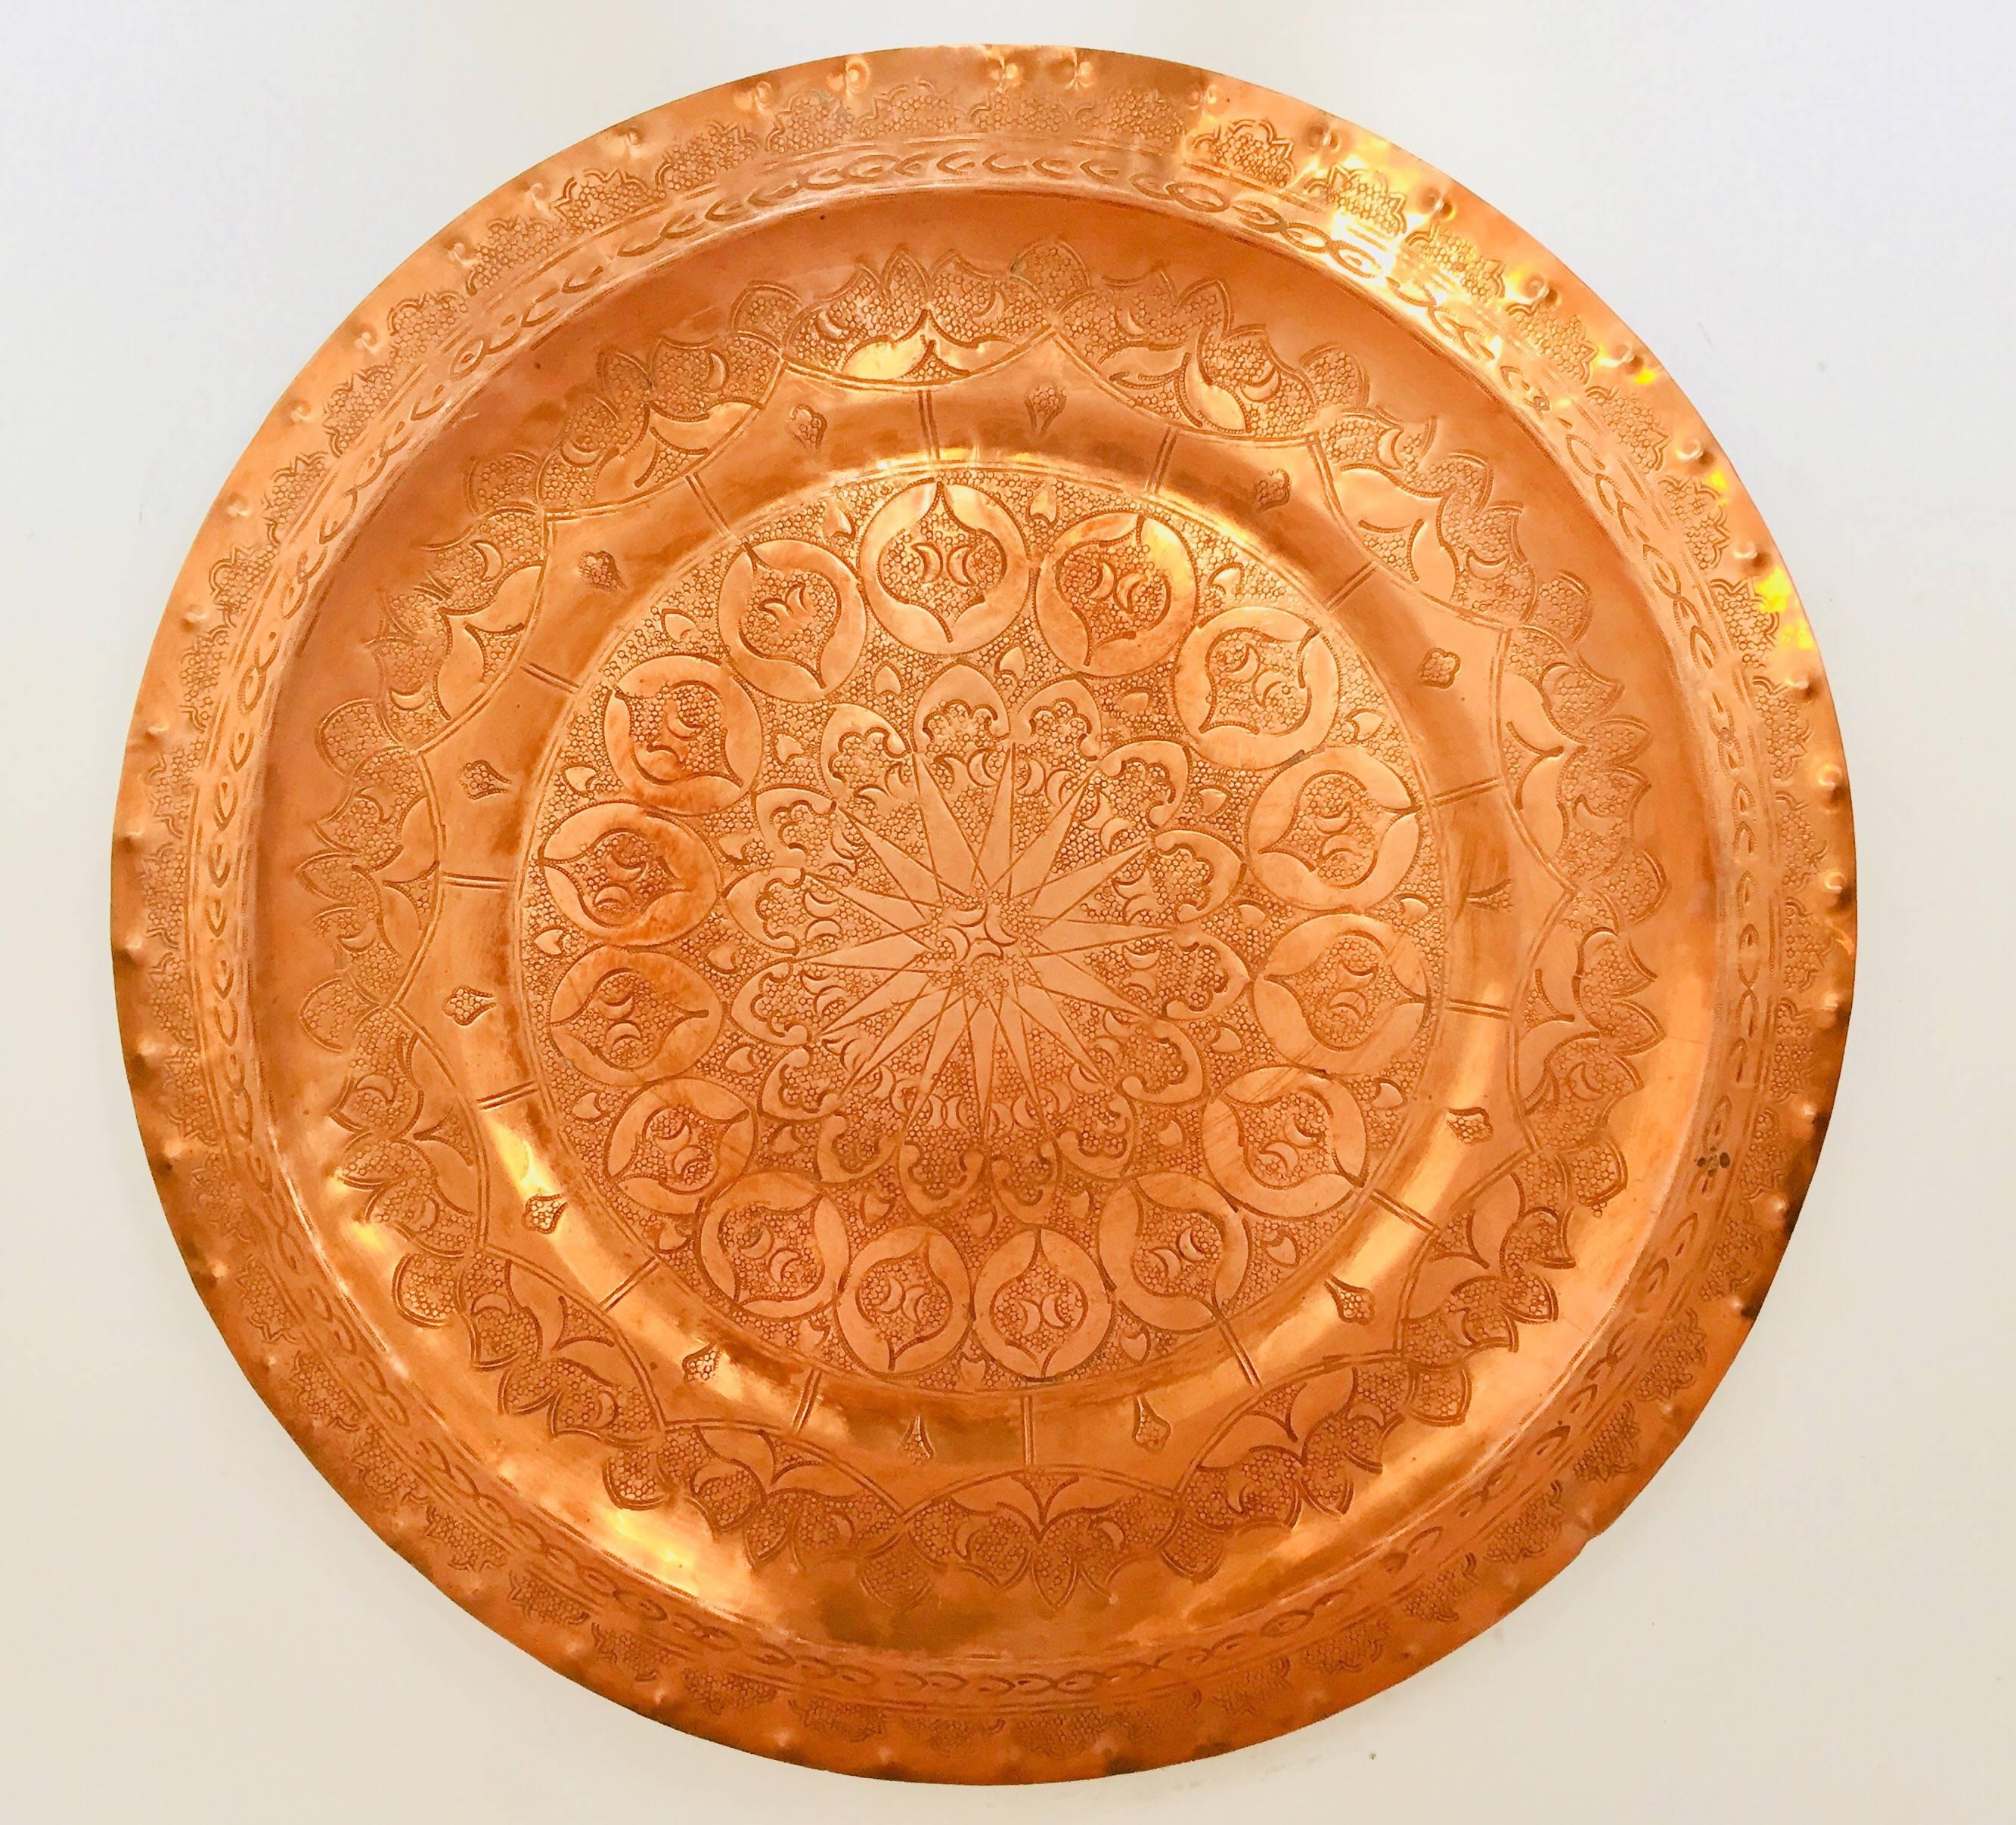 Vintage Moroccan polished round serving metal copper tray platter with traditional geometric Moorish designs.
Handcrafted by Master artisans in Fez, hand-hammered copper using simple tools.
Great brass decorative Islamic Art collector metalwork